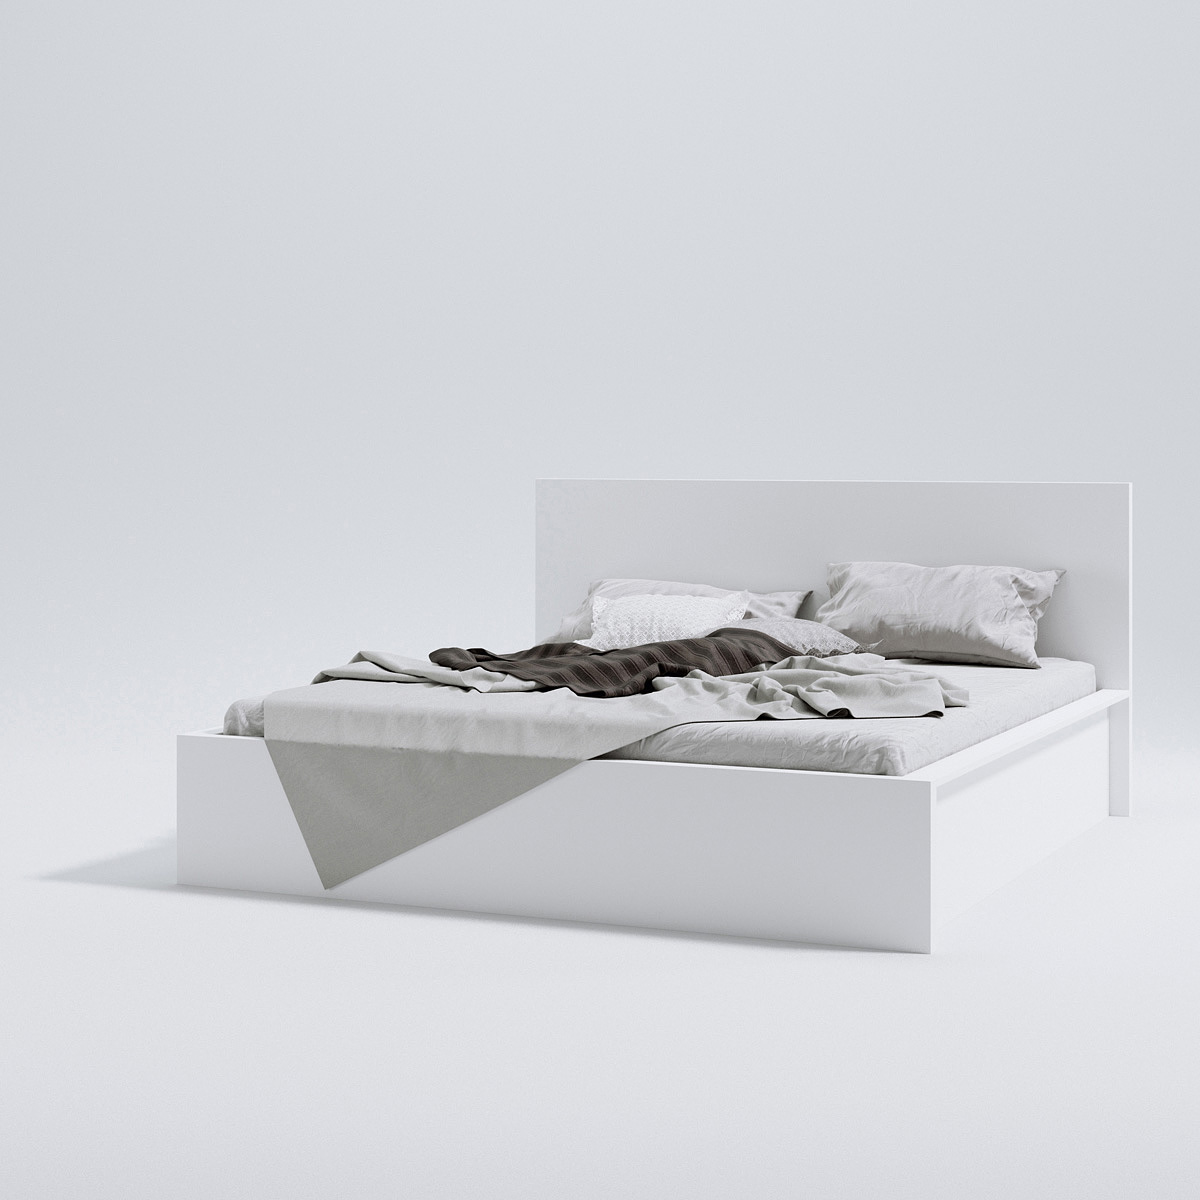 Vol 1 Beds Triangle Form 3d Models, Triangle Bed Frame